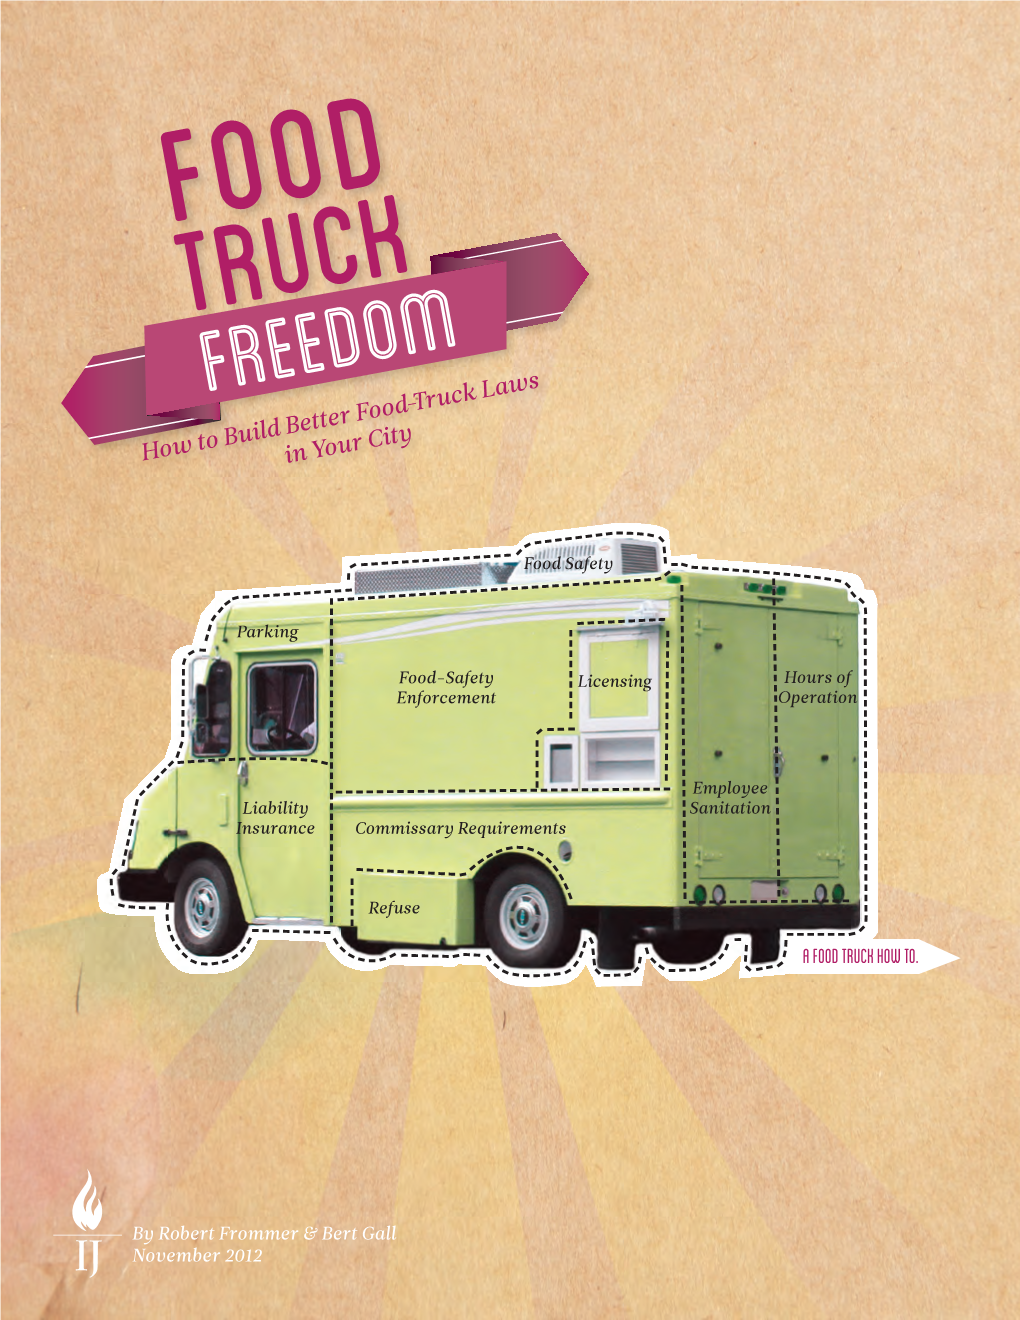 Food Truck Freedom: How to Build Better Food-Truck Laws in Your City